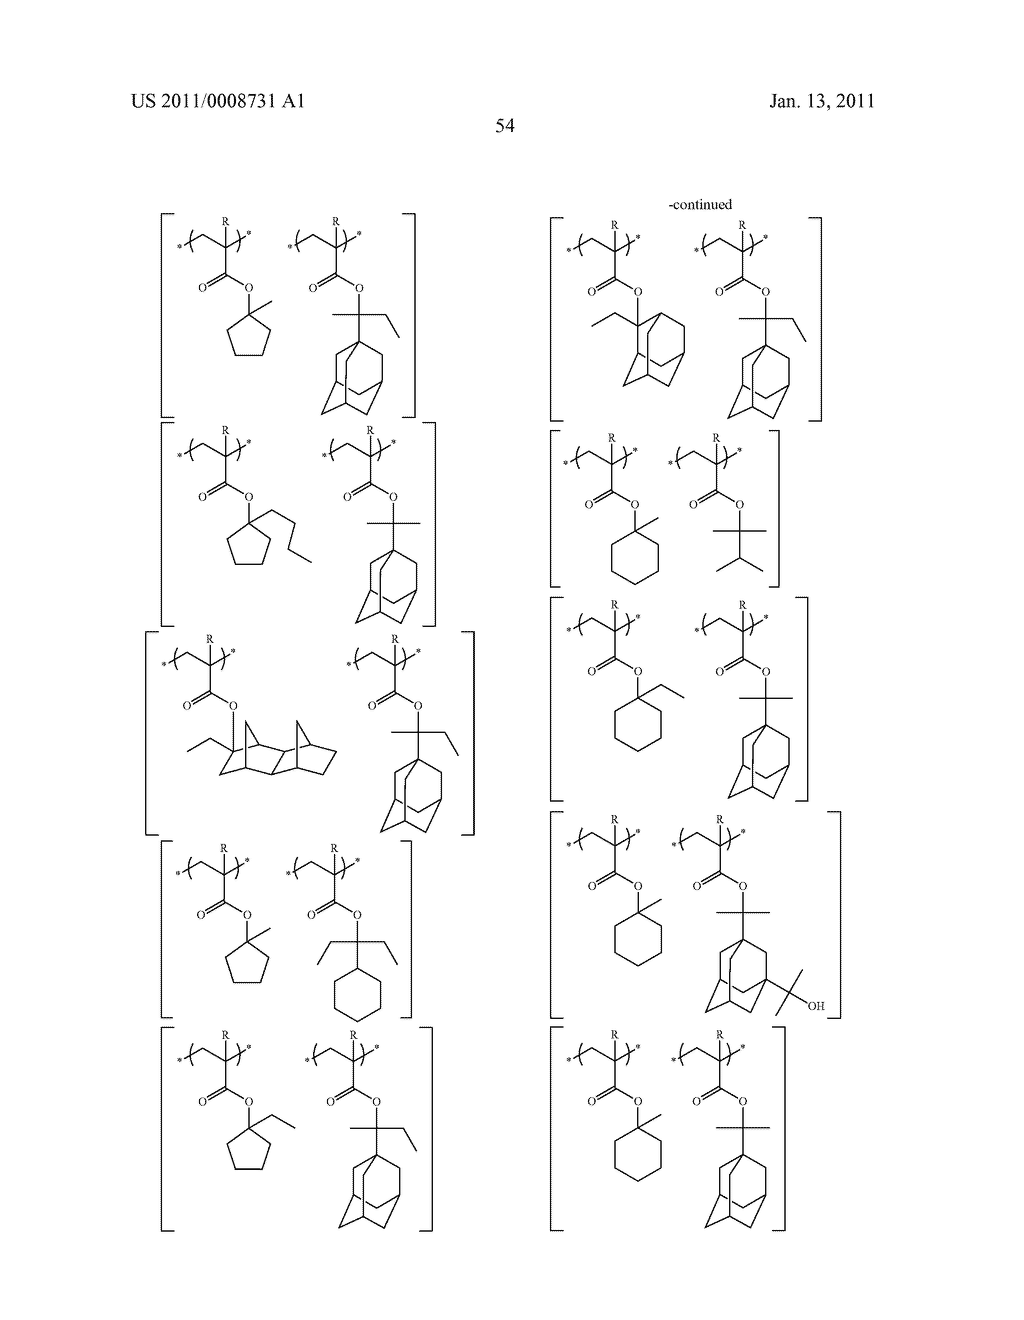 ACTINIC-RAY-OR RADIATION-SENSITIVE RESIN COMPOSITION, COMPOUND AND METHOD OF FORMING PATTERN USING THE COMPOSITION - diagram, schematic, and image 55